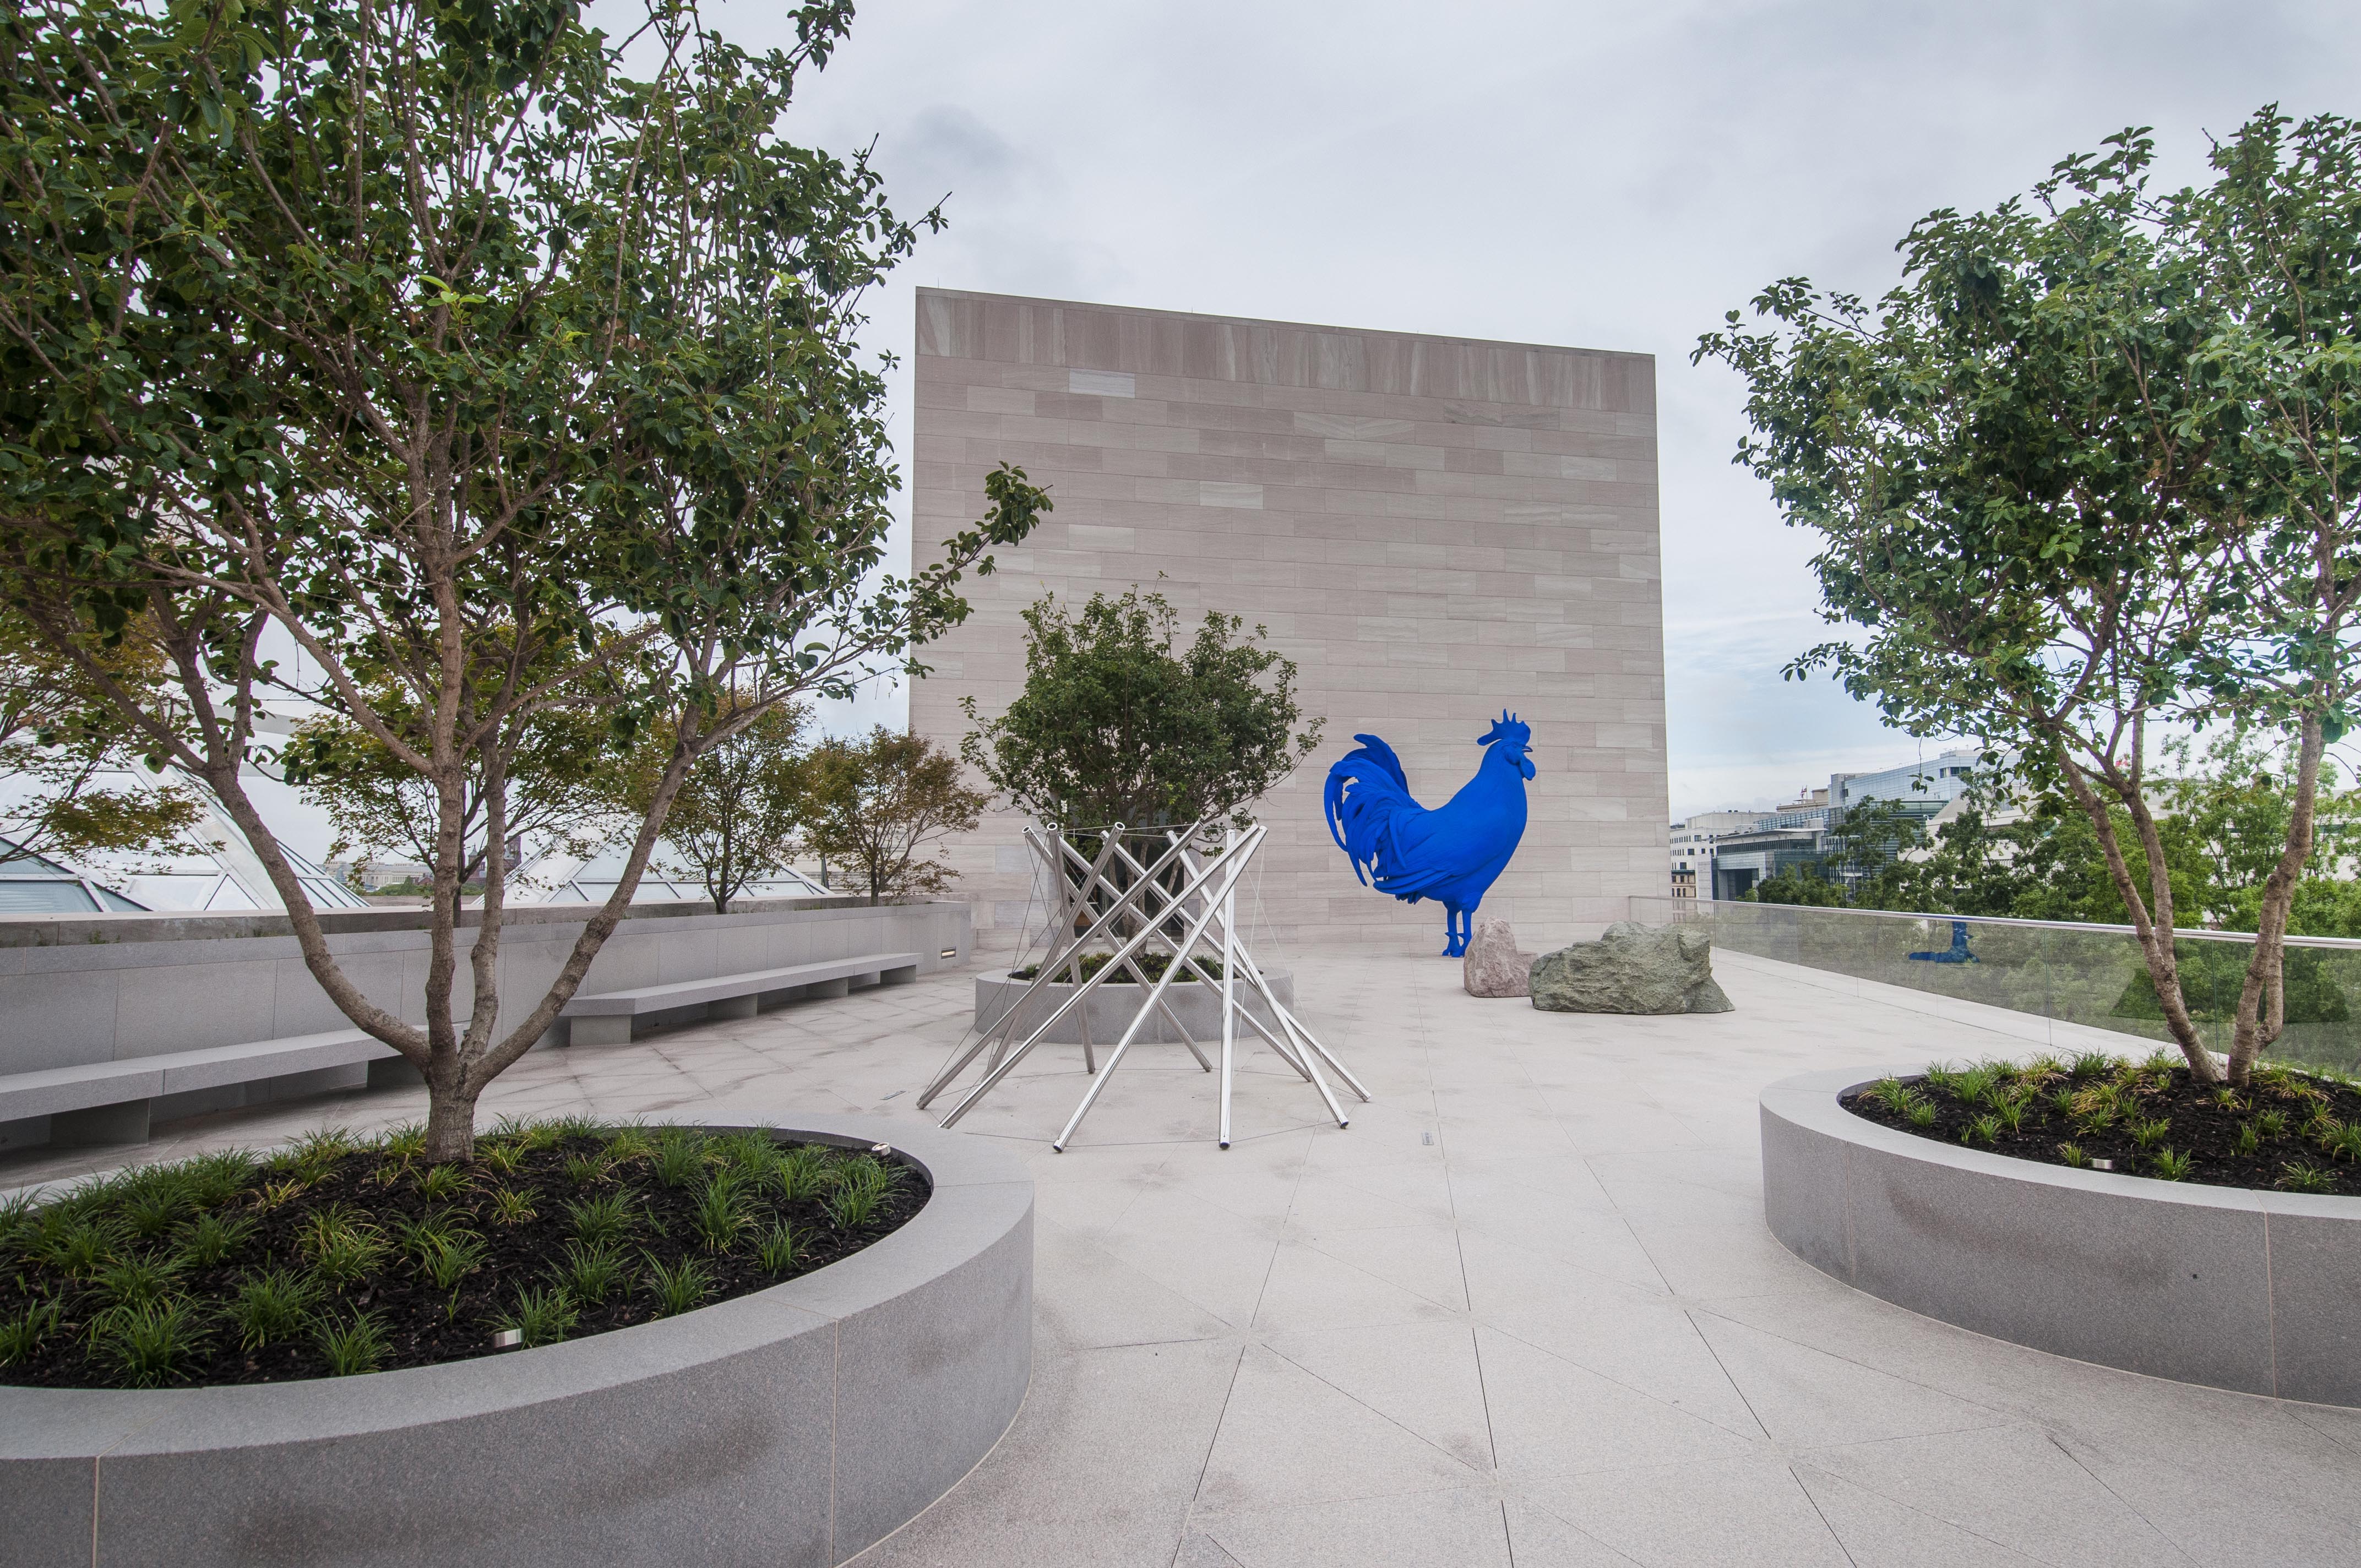 Photography of the new Roof Terrace of the National Gallery of Art East Building. Several sculptures are on view, including Hahn/Cock (2013) by German artist Katharina Fritsch